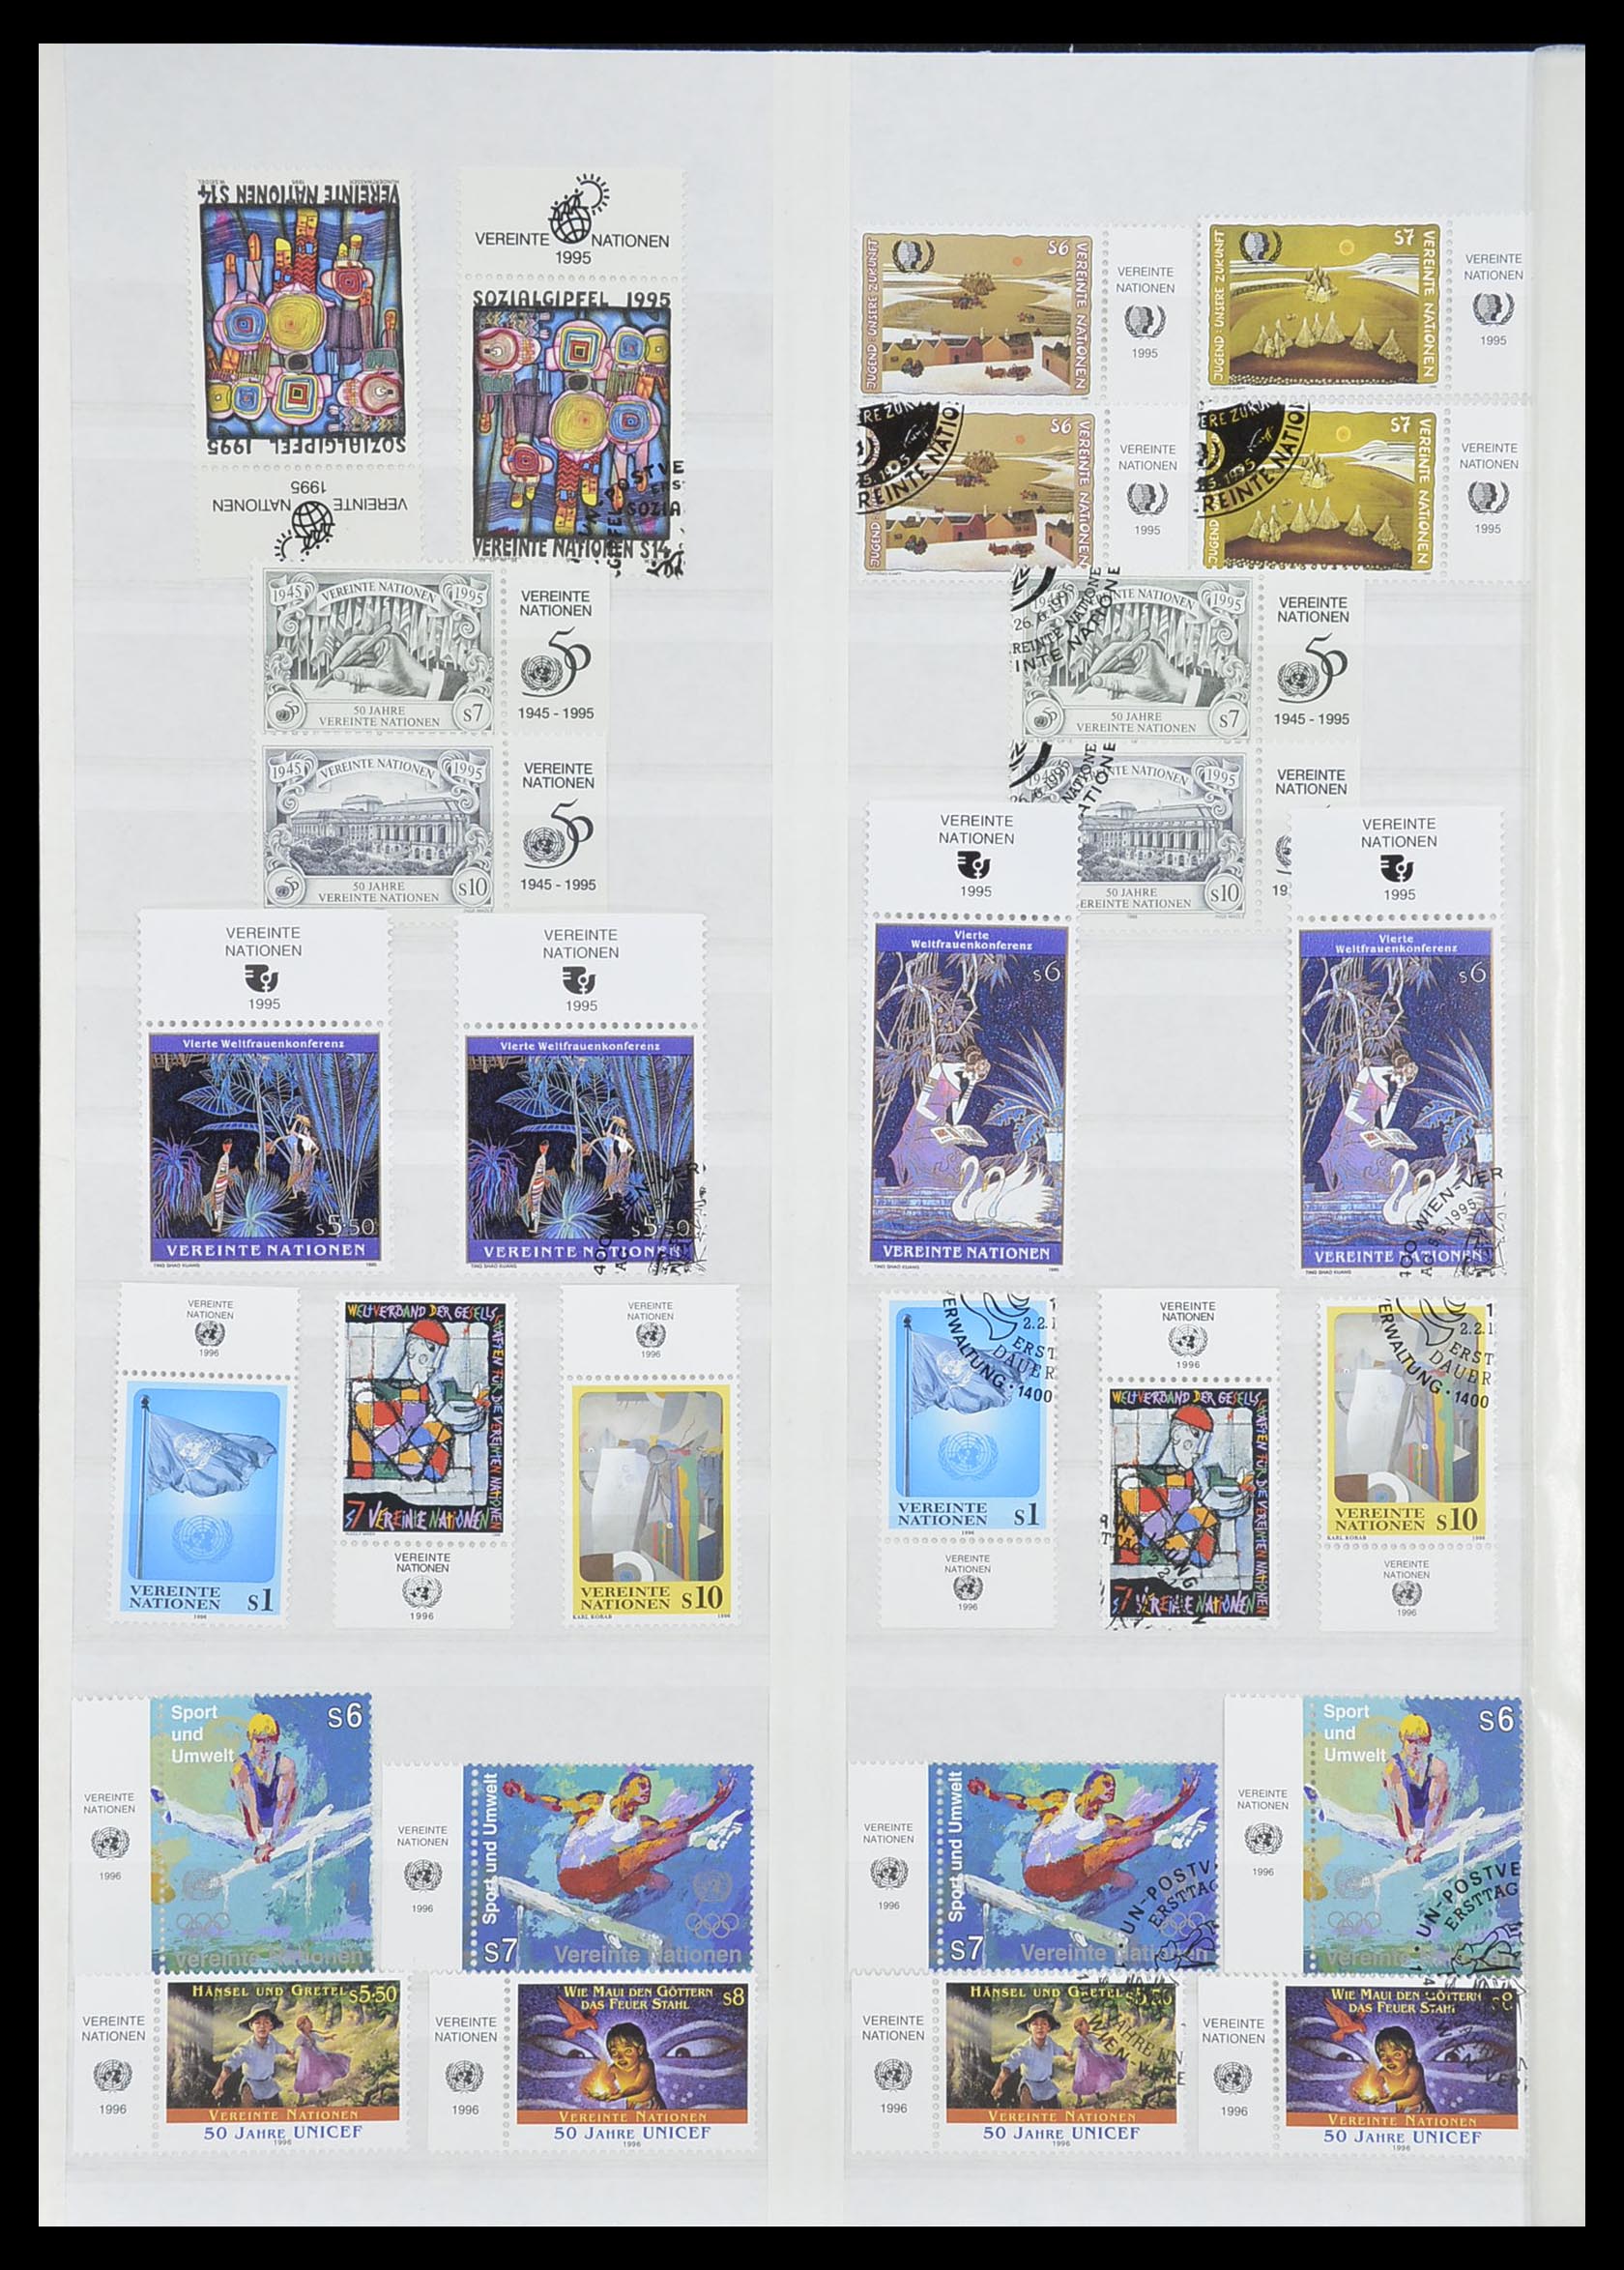 33538 051 - Stamp collection 33538 United Nations until 2017!